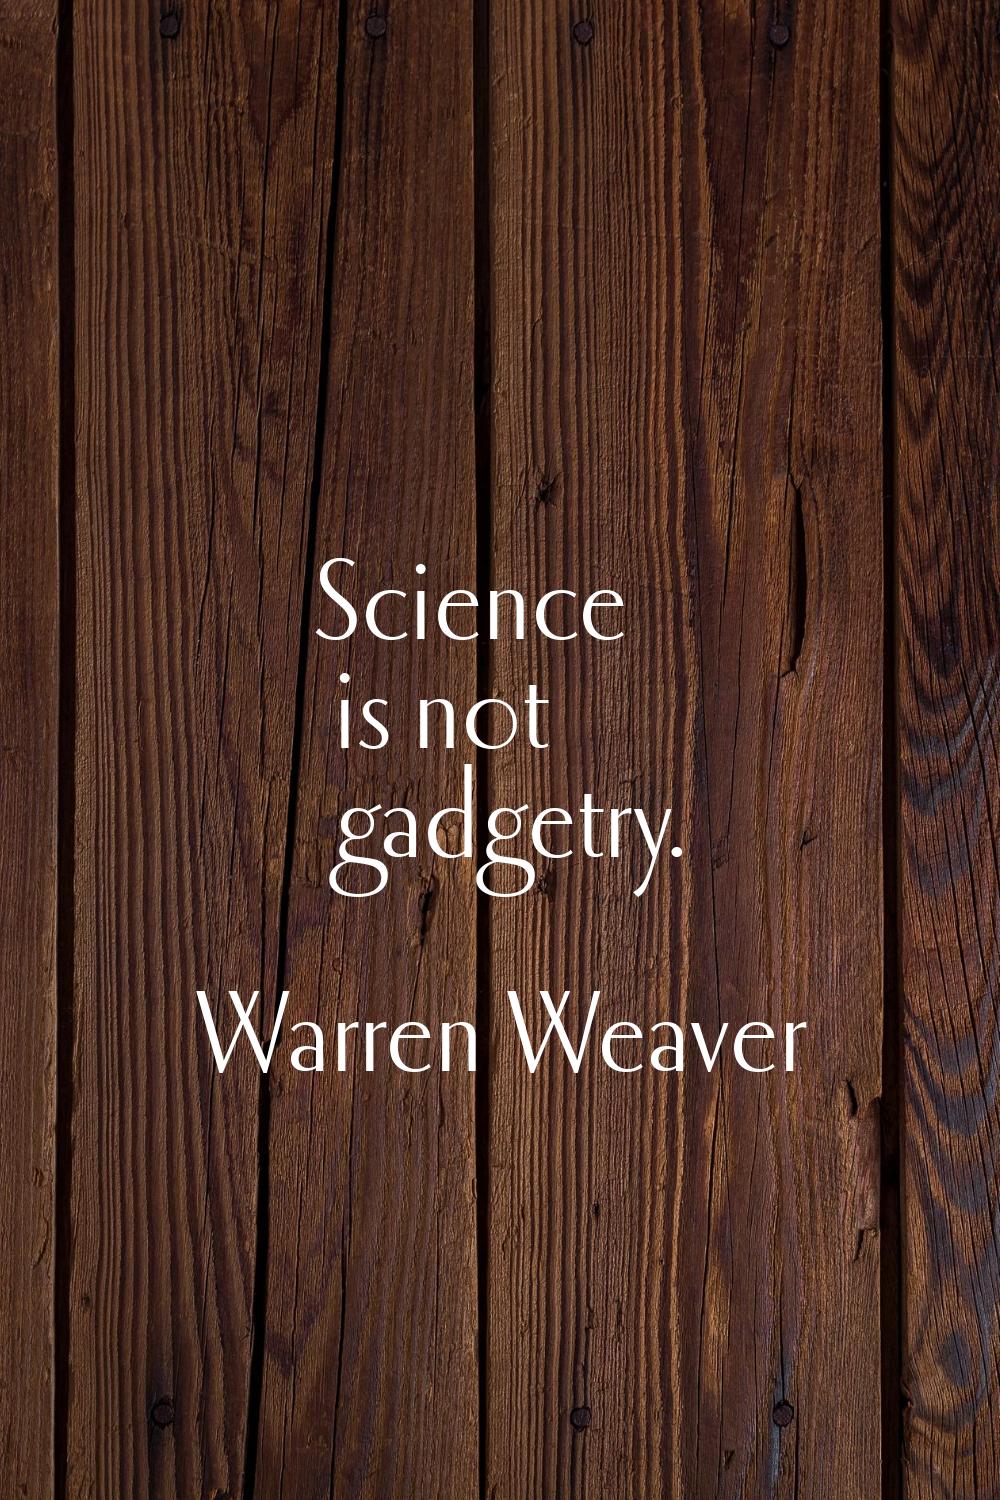 Science is not gadgetry.